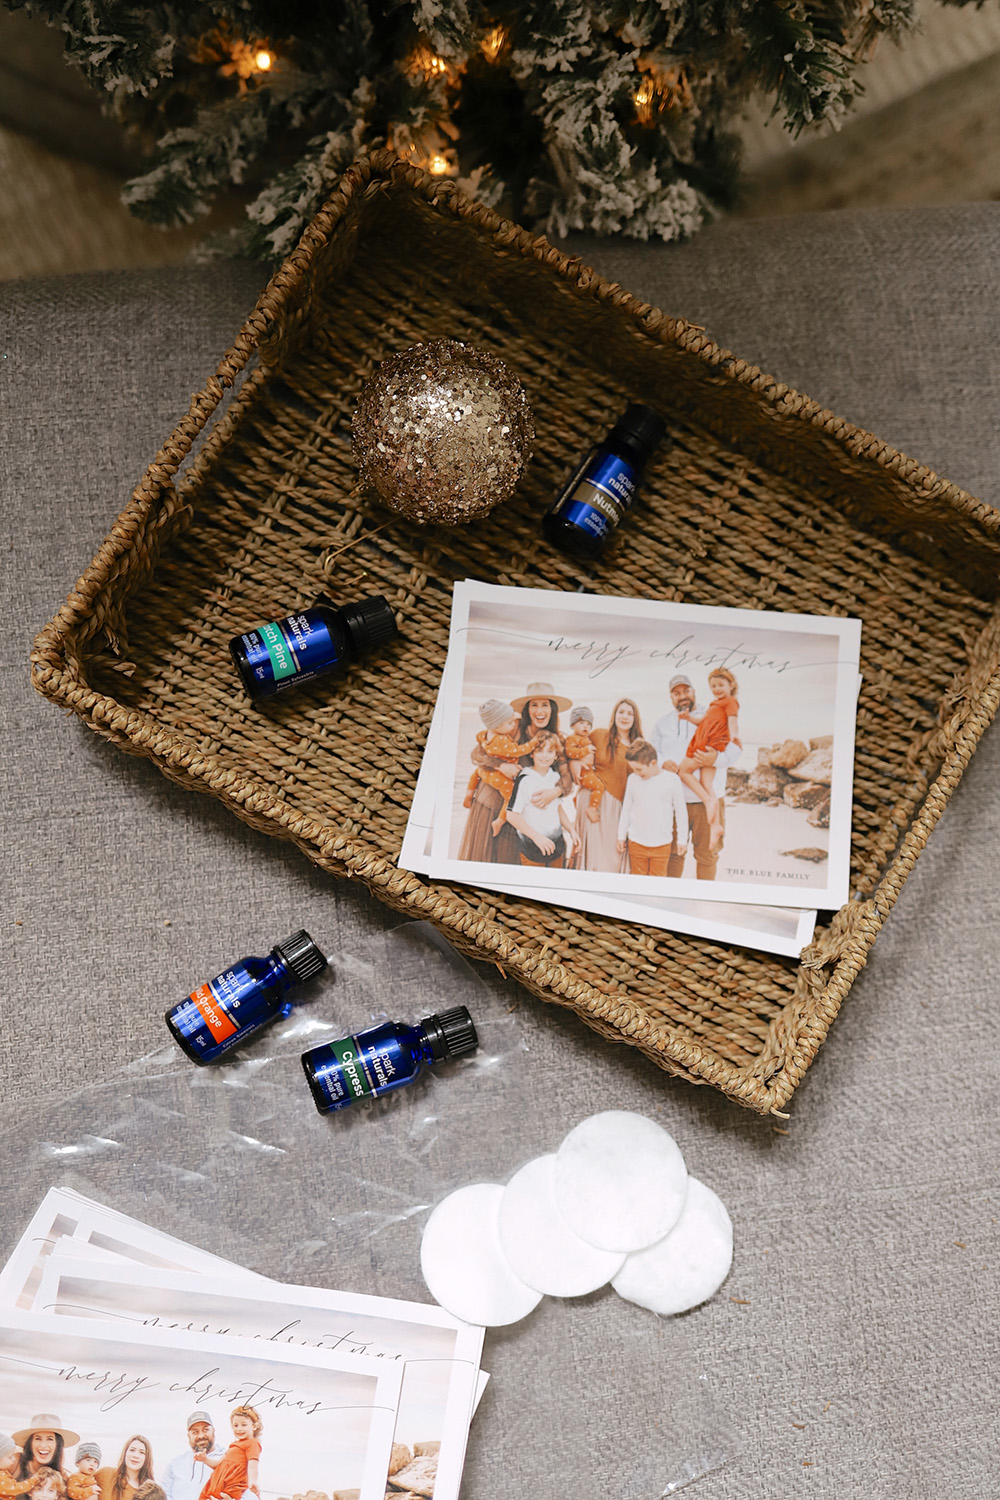 How to Make Essential Oil Holiday Cards, a tutorial featured by top US essential oil blogger, Fresh Mommy